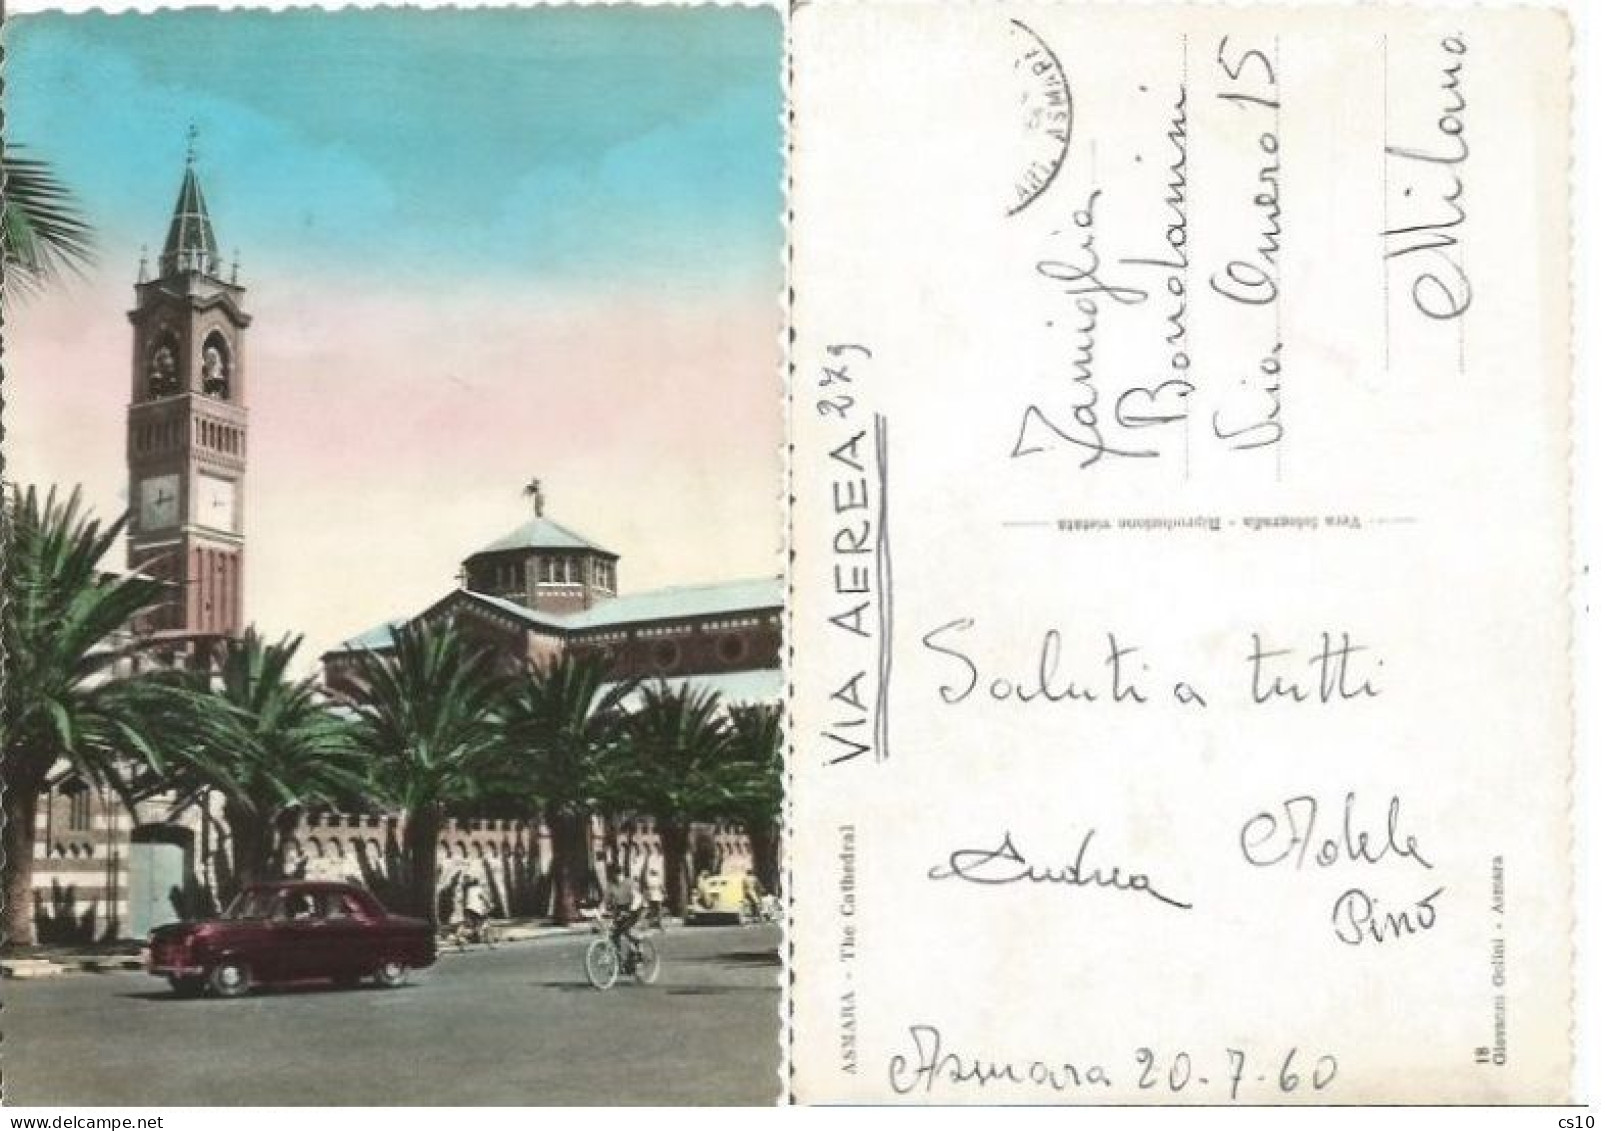 Eritrea (Ethiopia Period) Asmara Cathedral + Cars & Bicycles - Stampless Color Airmail Pcard 20jul1960 To Italy - Ethiopia